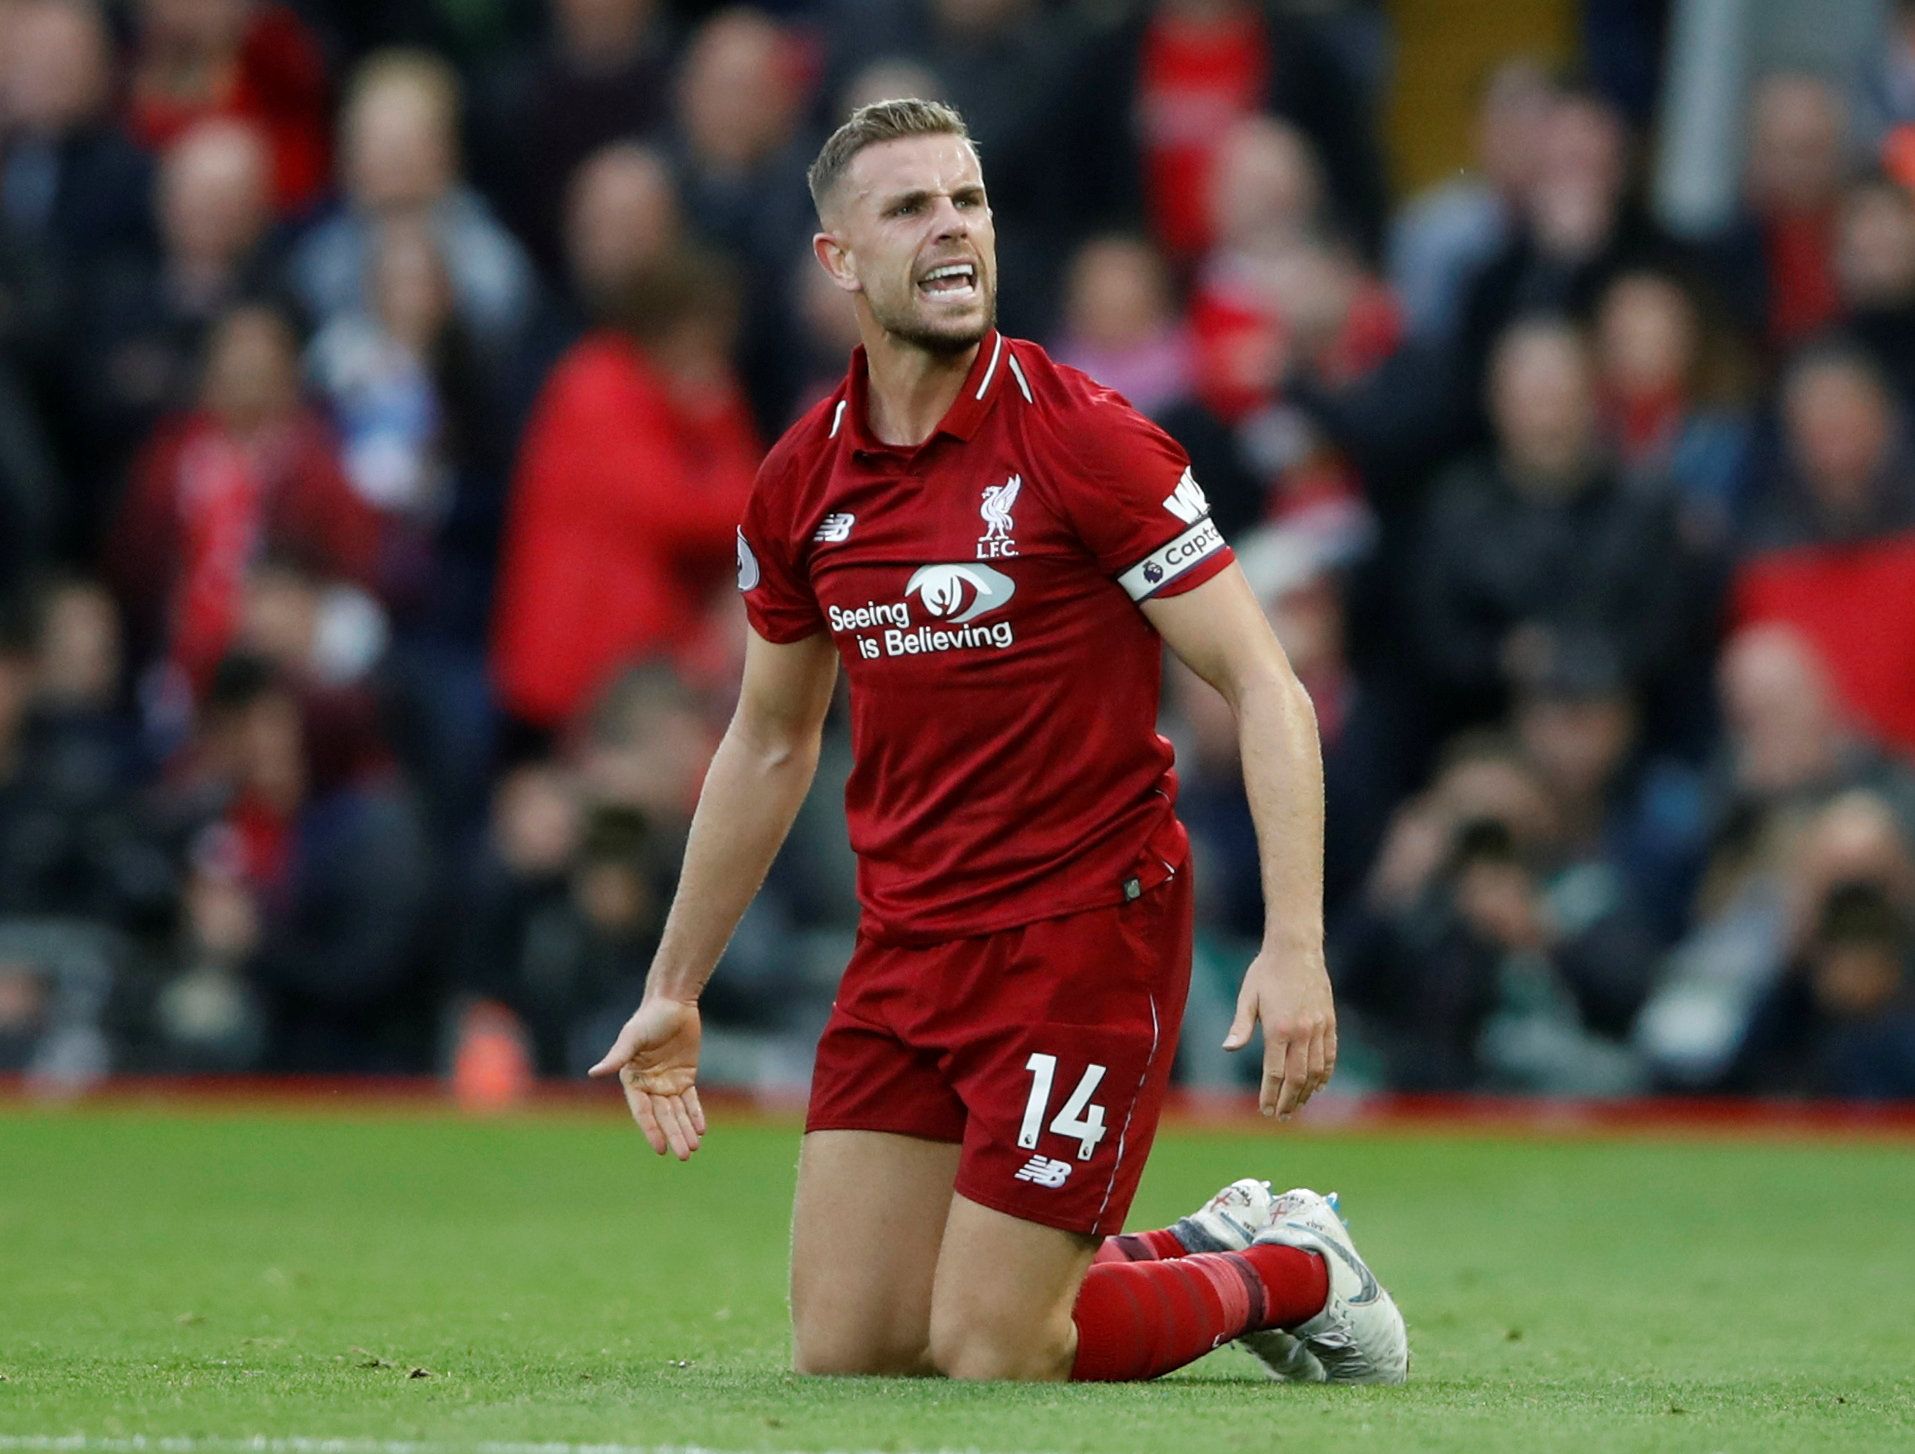 Soccer Football - Premier League - Liverpool v Manchester City - Anfield, Liverpool, Britain - October 7, 2018  Liverpool's Jordan Henderson reacts  Action Images via Reuters/Carl Recine  EDITORIAL USE ONLY. No use with unauthorized audio, video, data, fixture lists, club/league logos or 